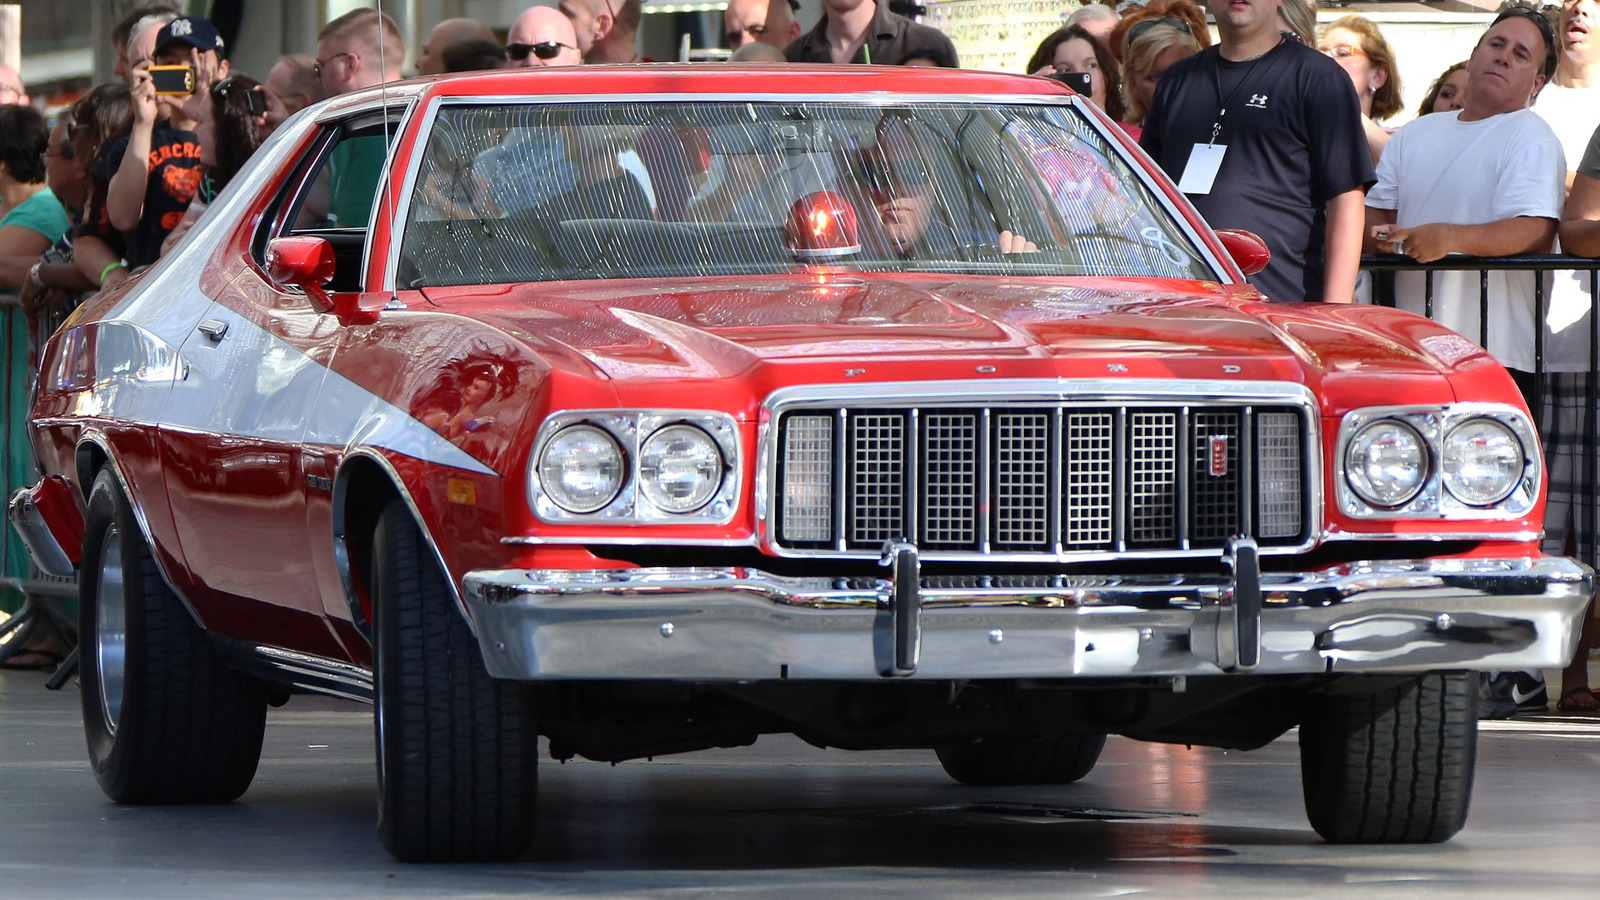 Gran Torino: A Closer Look At The Famous Starsky & Hutch Car